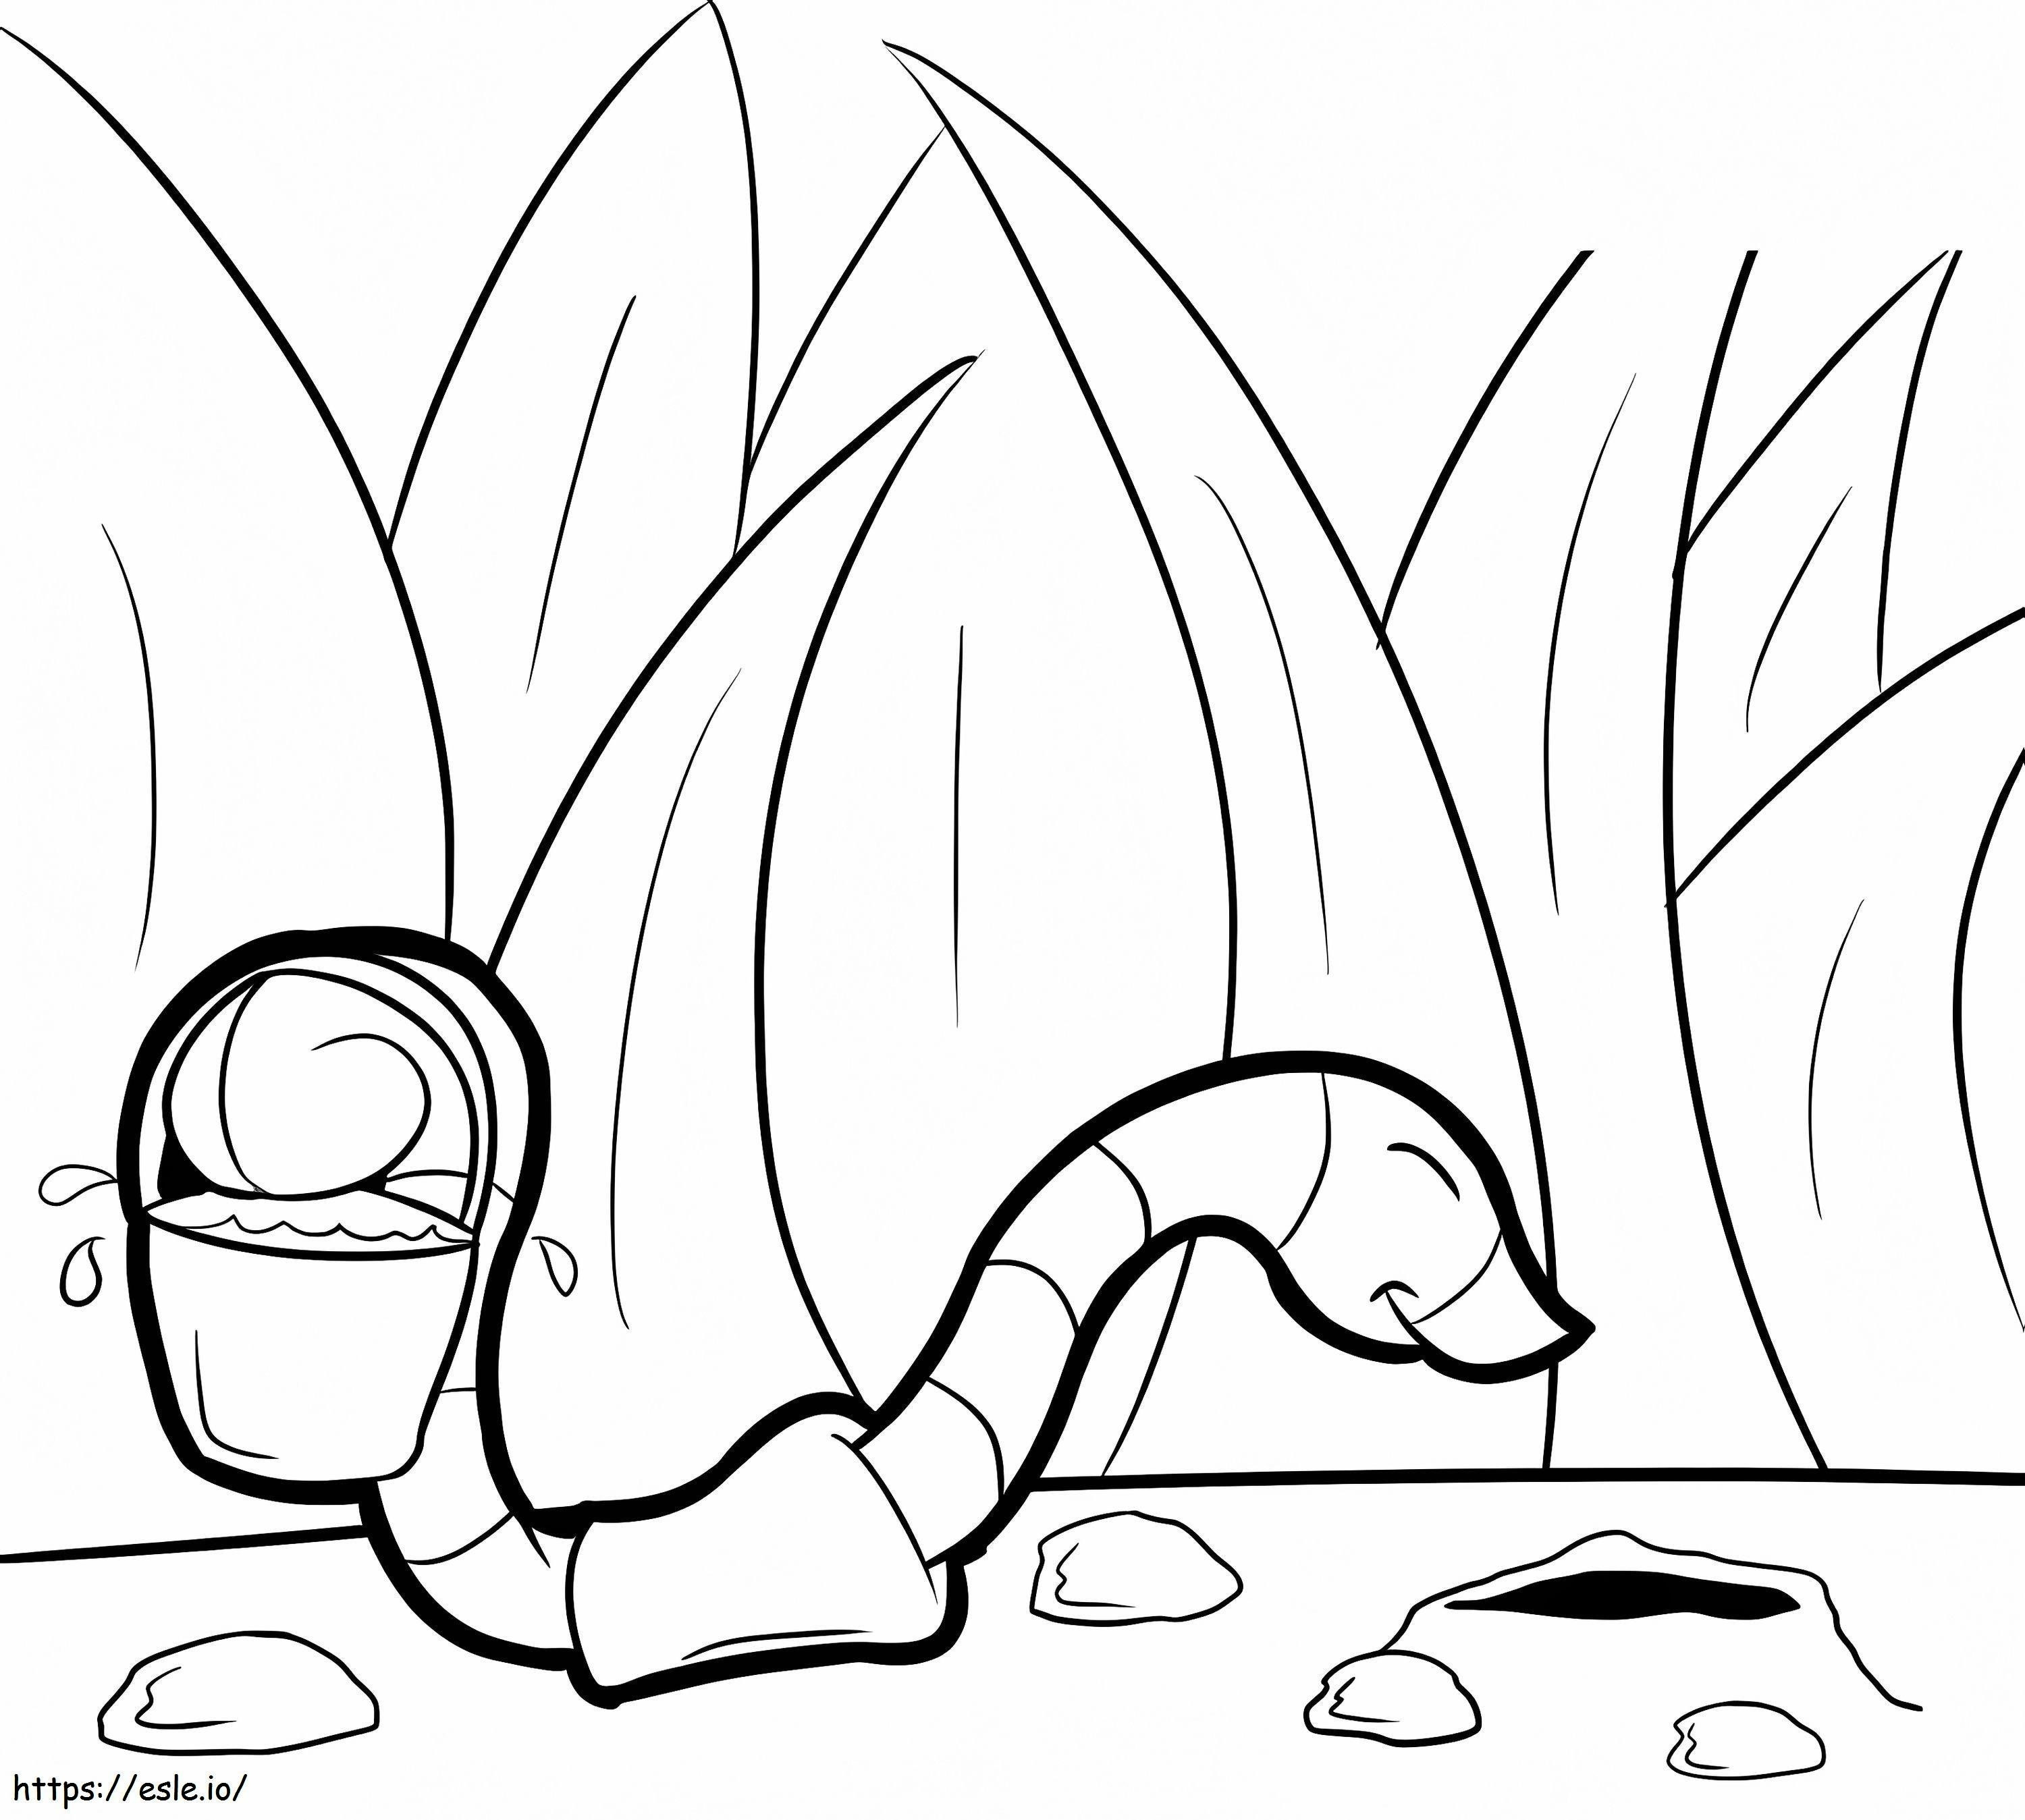 Earthworm 3 coloring page